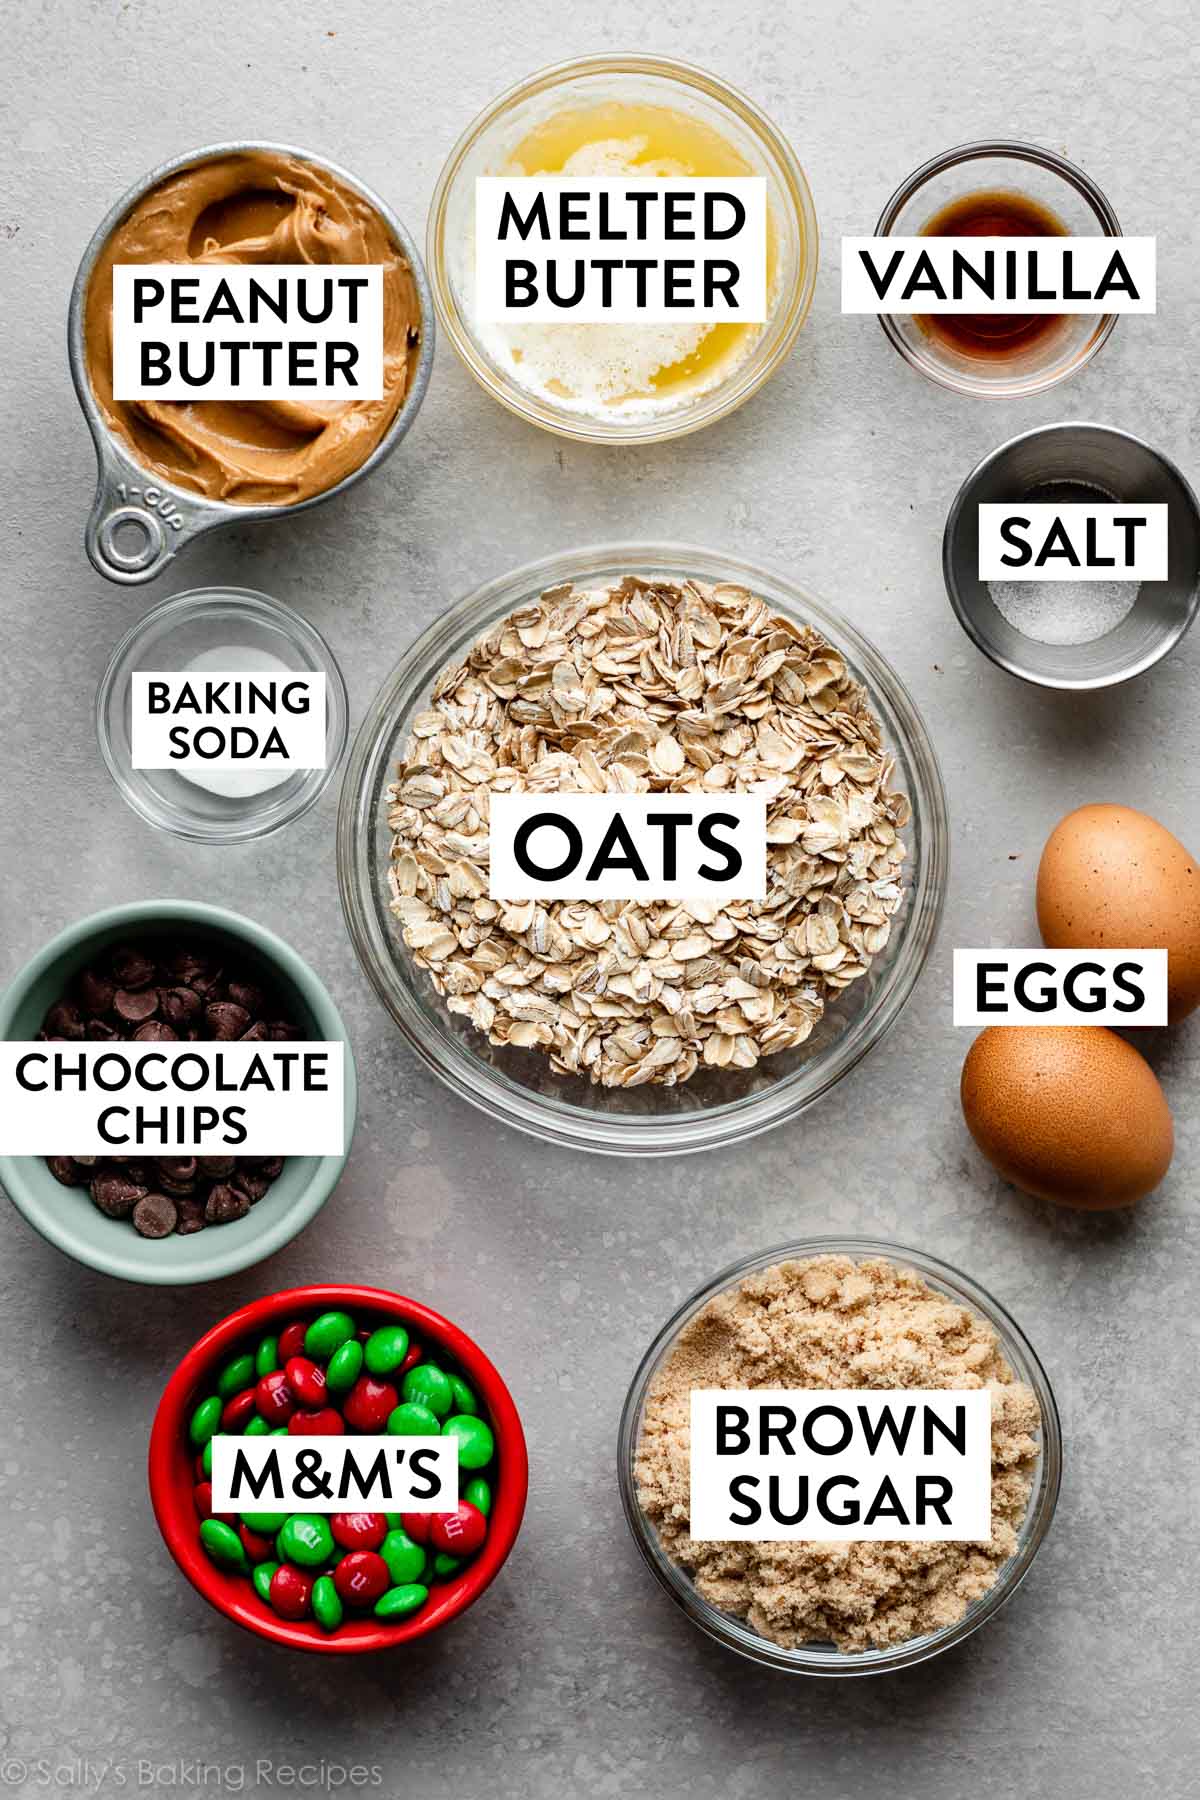 measured ingredients in bowls on gray backdrop including peanut butter, brown sugar, salt, chocolate chips, mms, vanilla, and eggs.